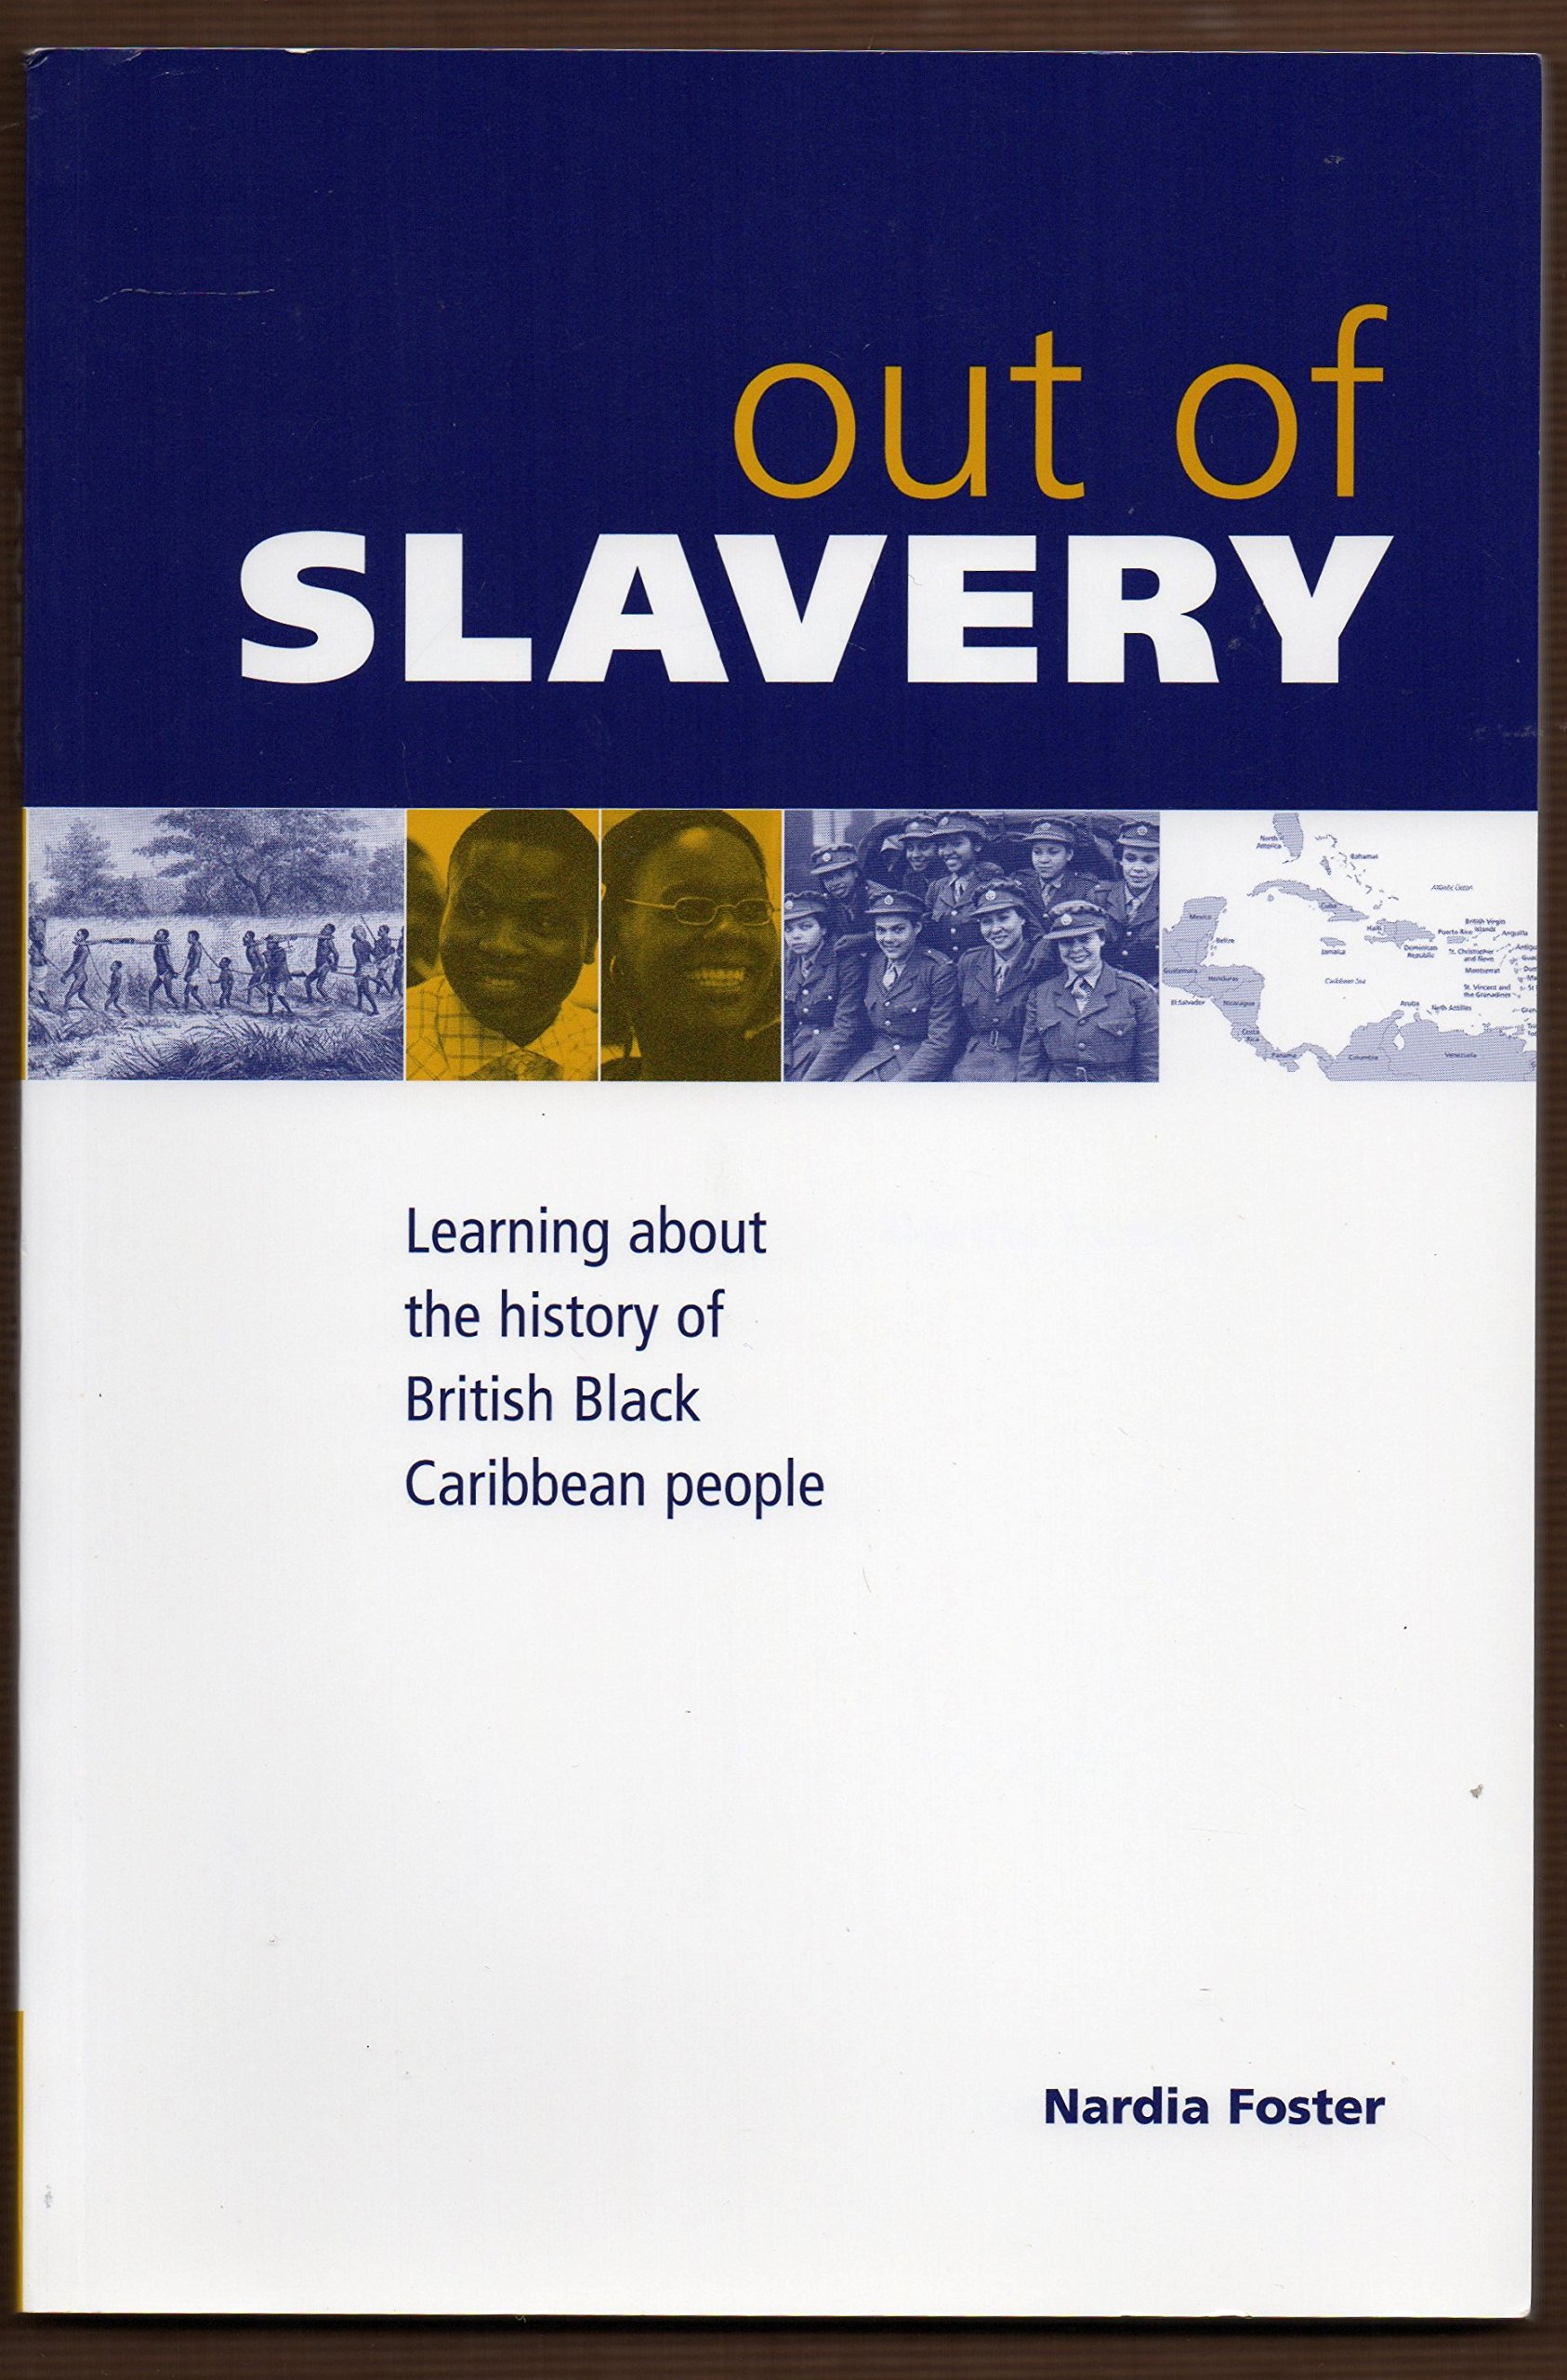 Out of Slavery: Learning about the history of Black British Caribbean People book cover